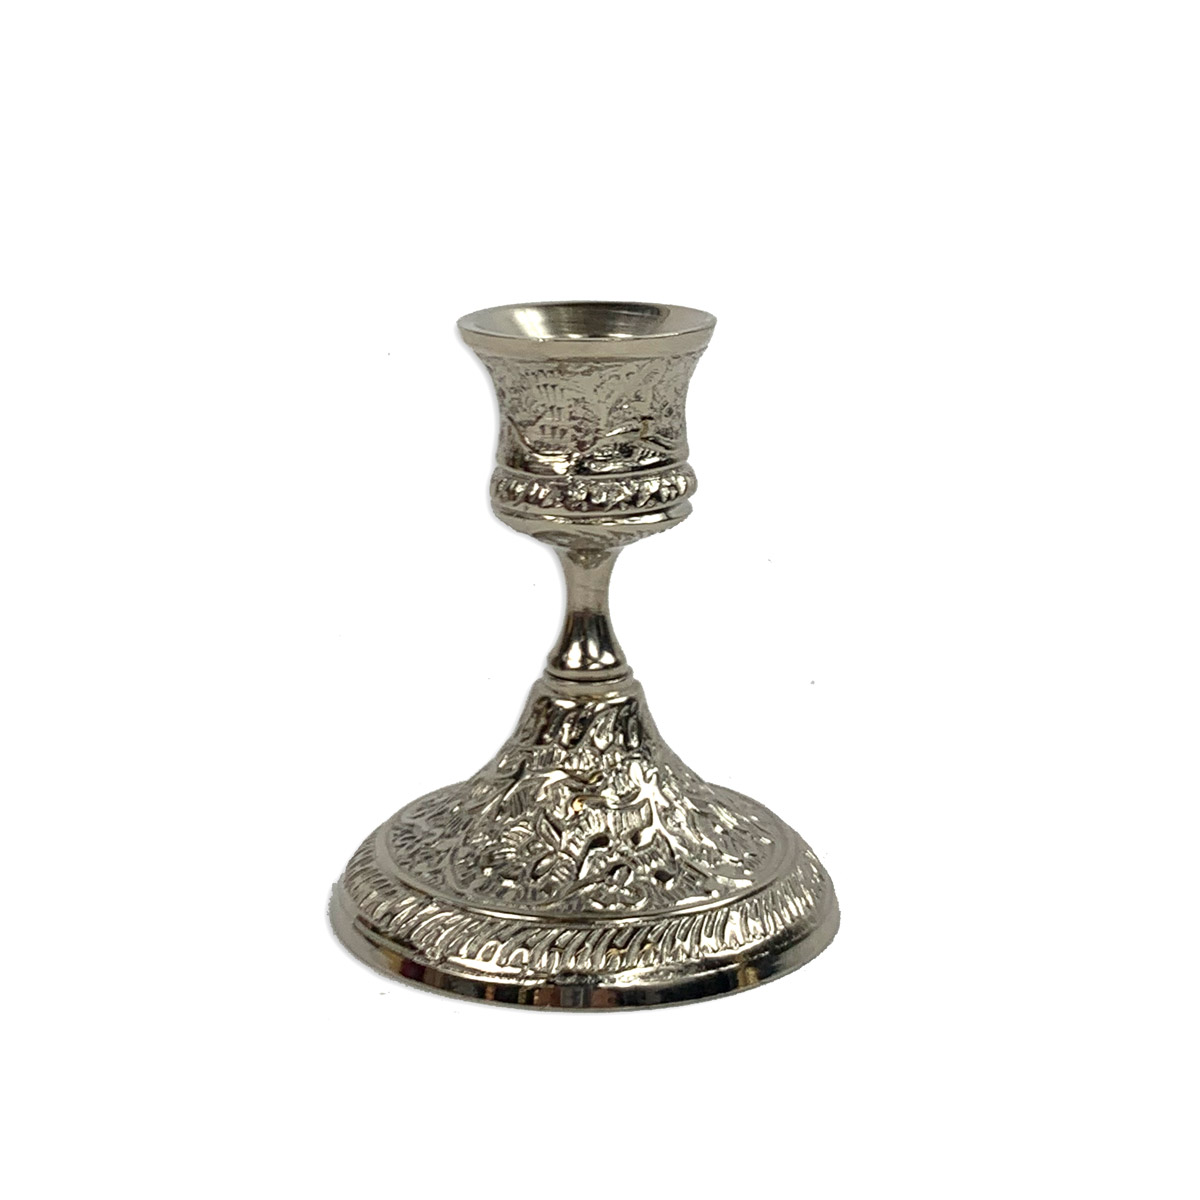 ORNATE BRASS TAPER CANDLE HOLDER (Silver)